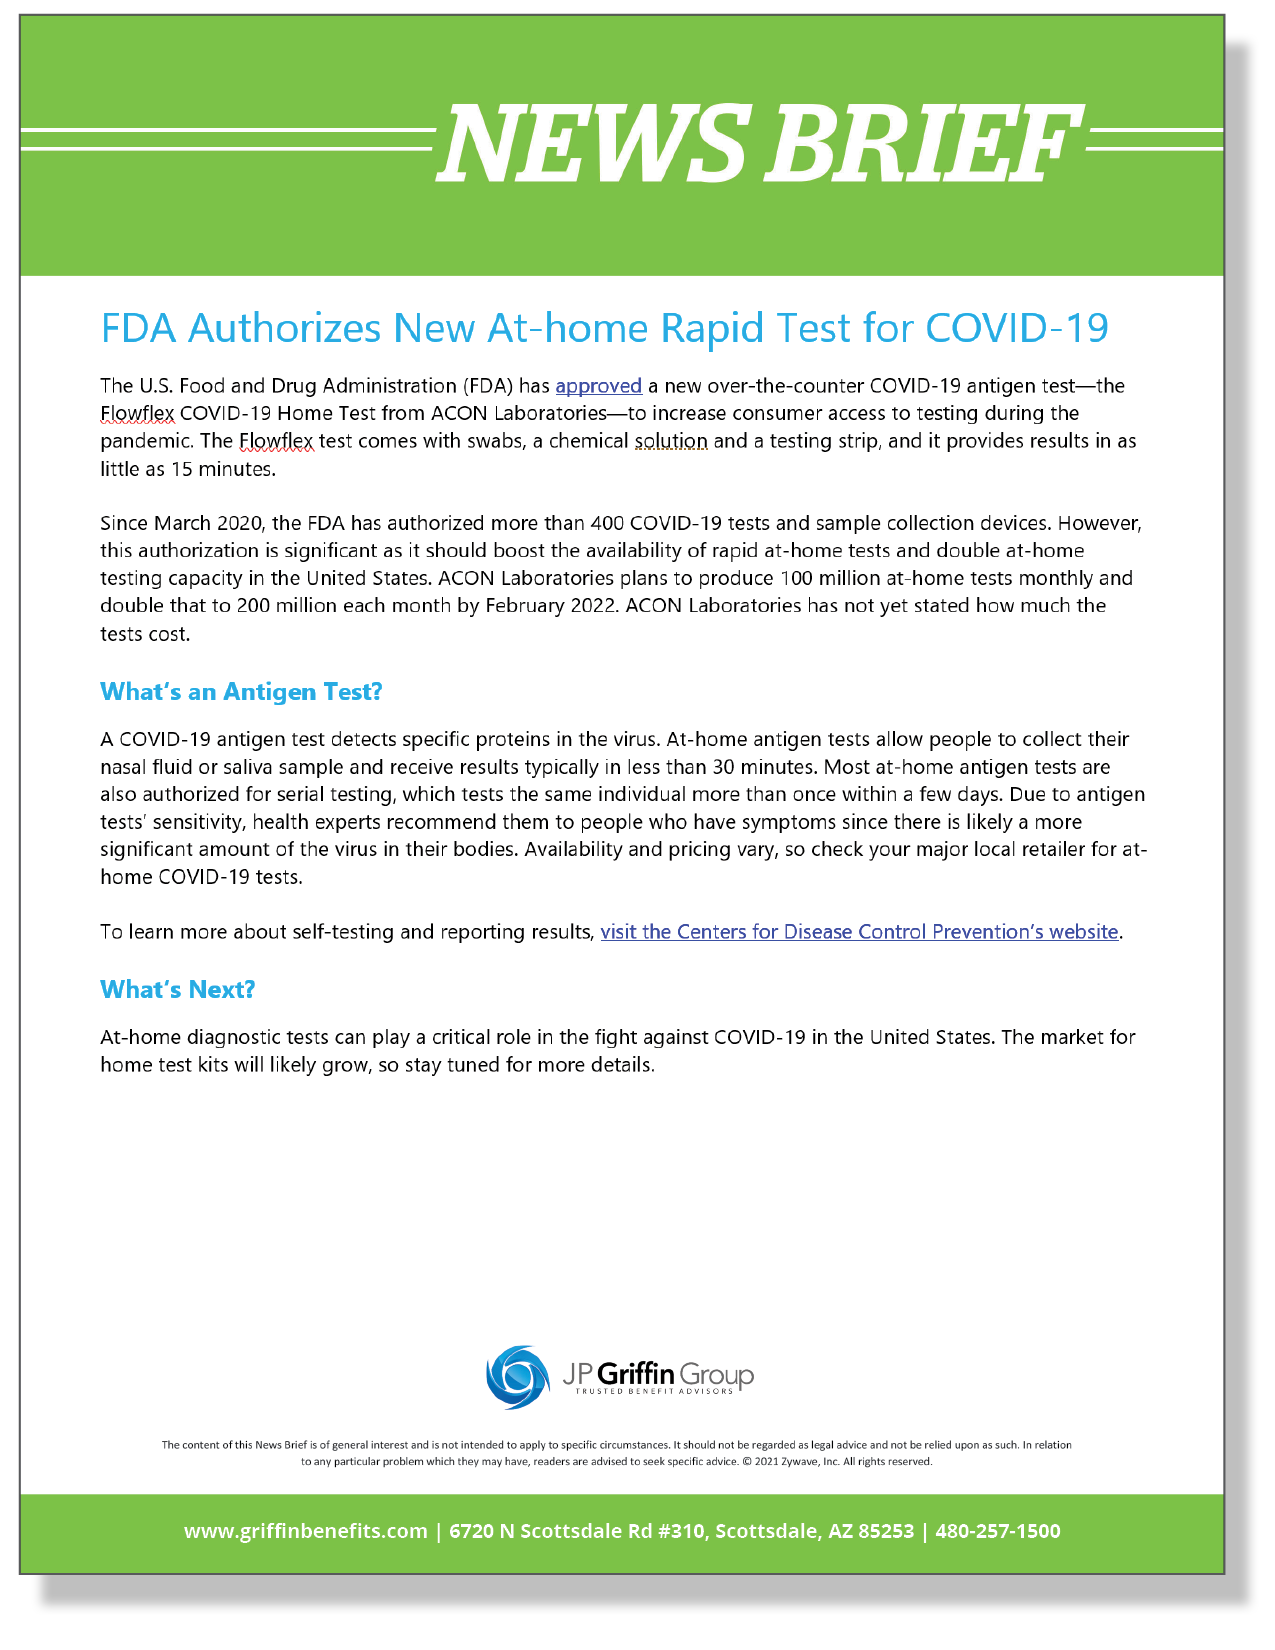 FDA Authorizes New At-home Rapid Test for COVID-19